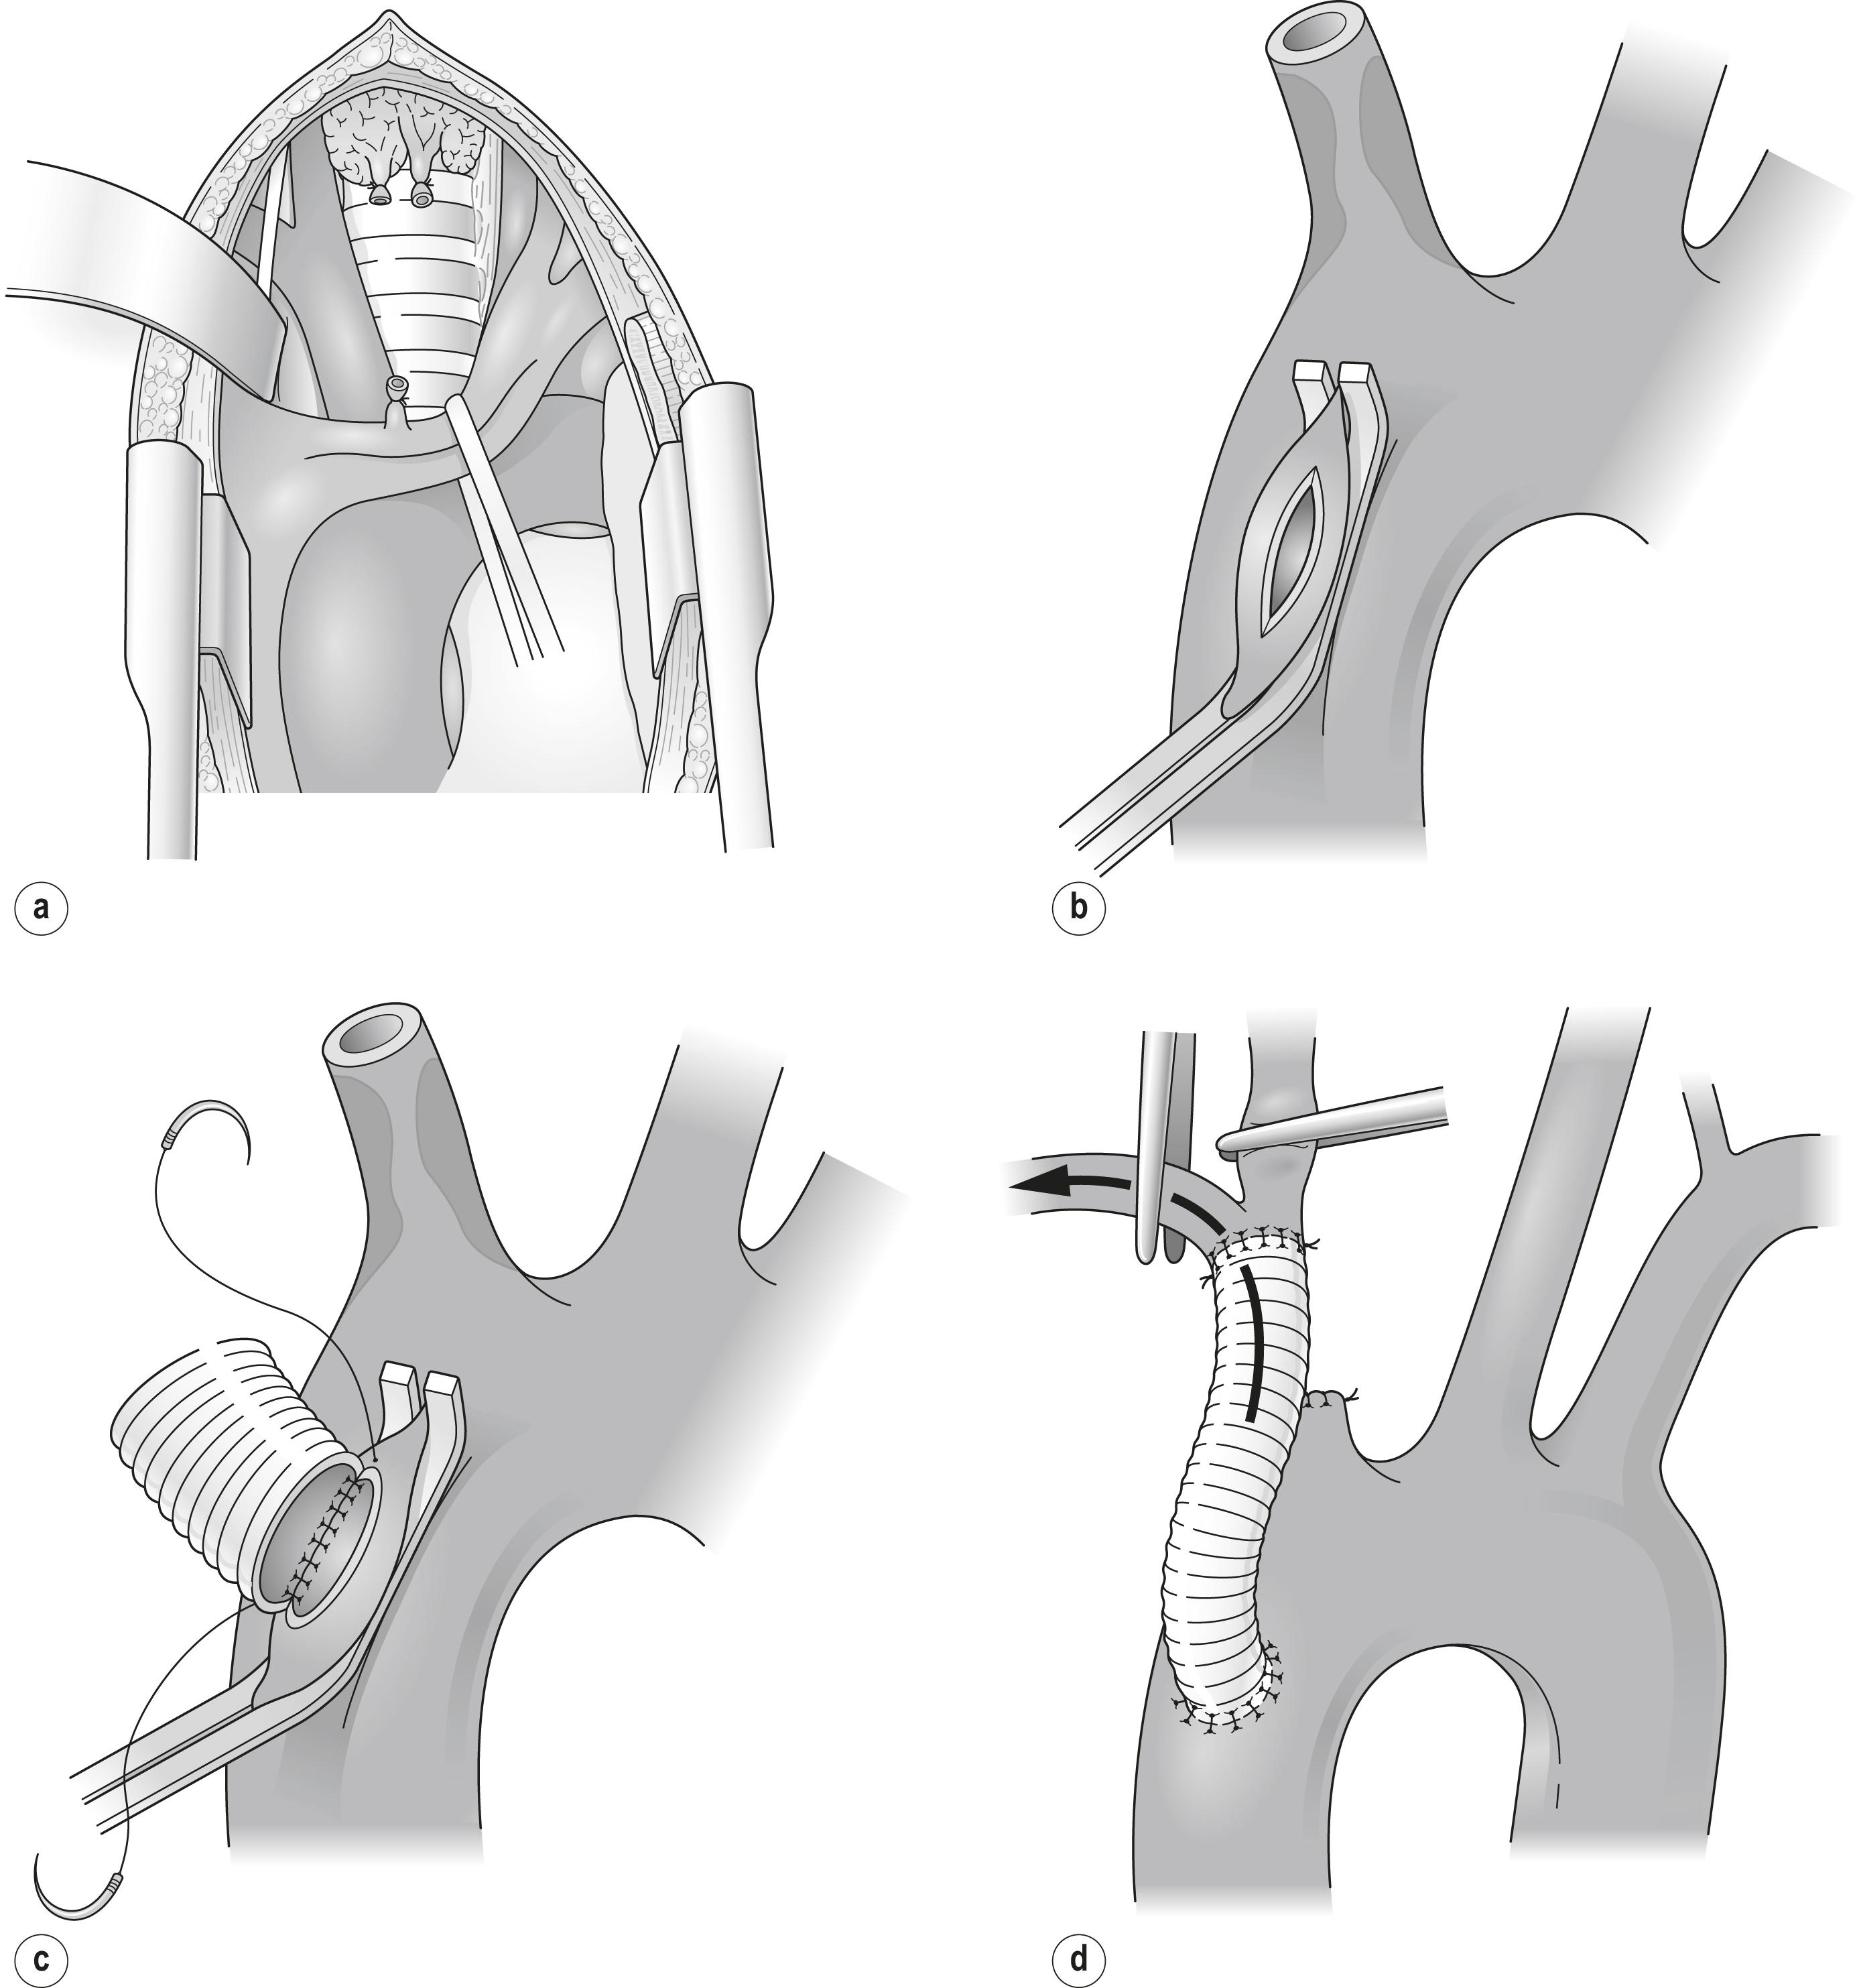 Figure 11.1, (a) The left brachiocephalic vein is retracted to expose the brachiocephalic artery. (b) A clamp is applied laterally to the ascending aorta. (c) A polyester graft is implanted on the ascending thoracic aorta proximal to the brachiocephalic artery. (d) Completed bypass. Flow is released into the arm and then into the common carotid artery.